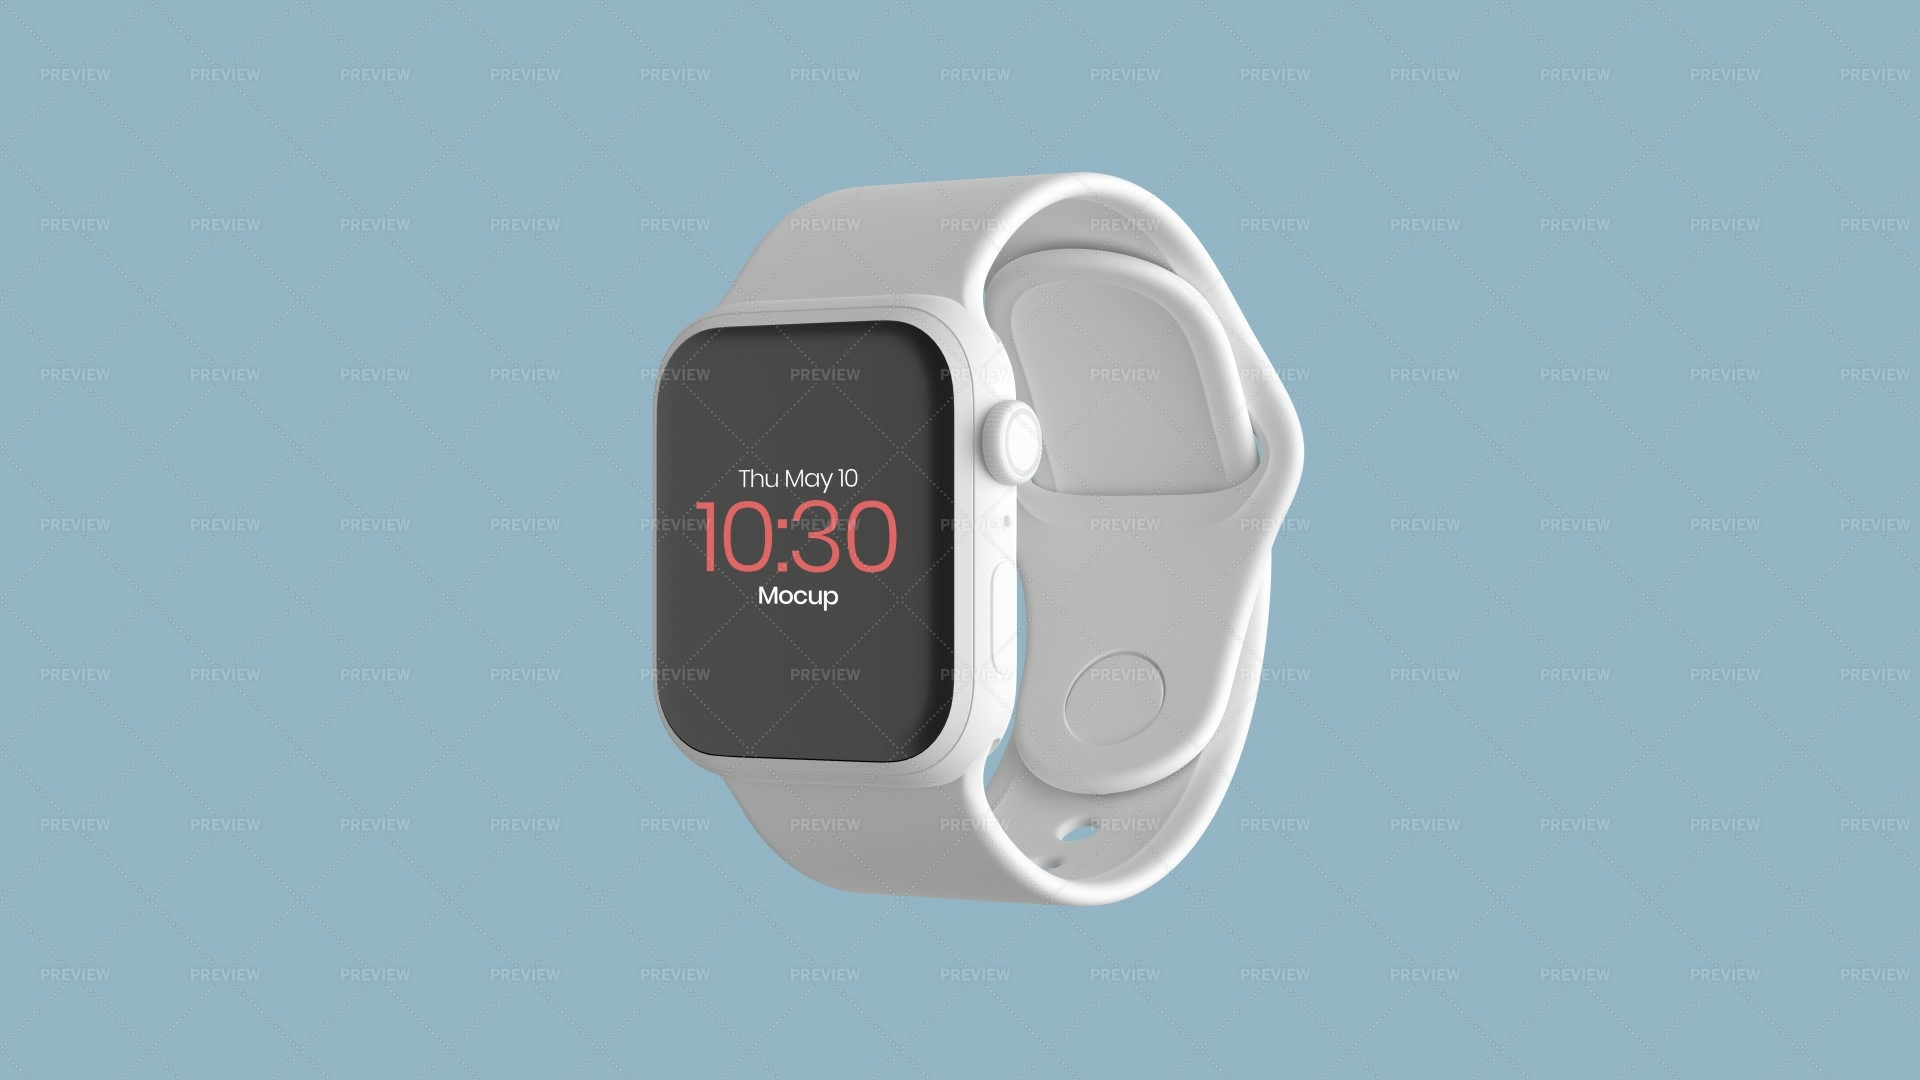 Watch Mockup in 2023 | Mockup, Watches, Ups